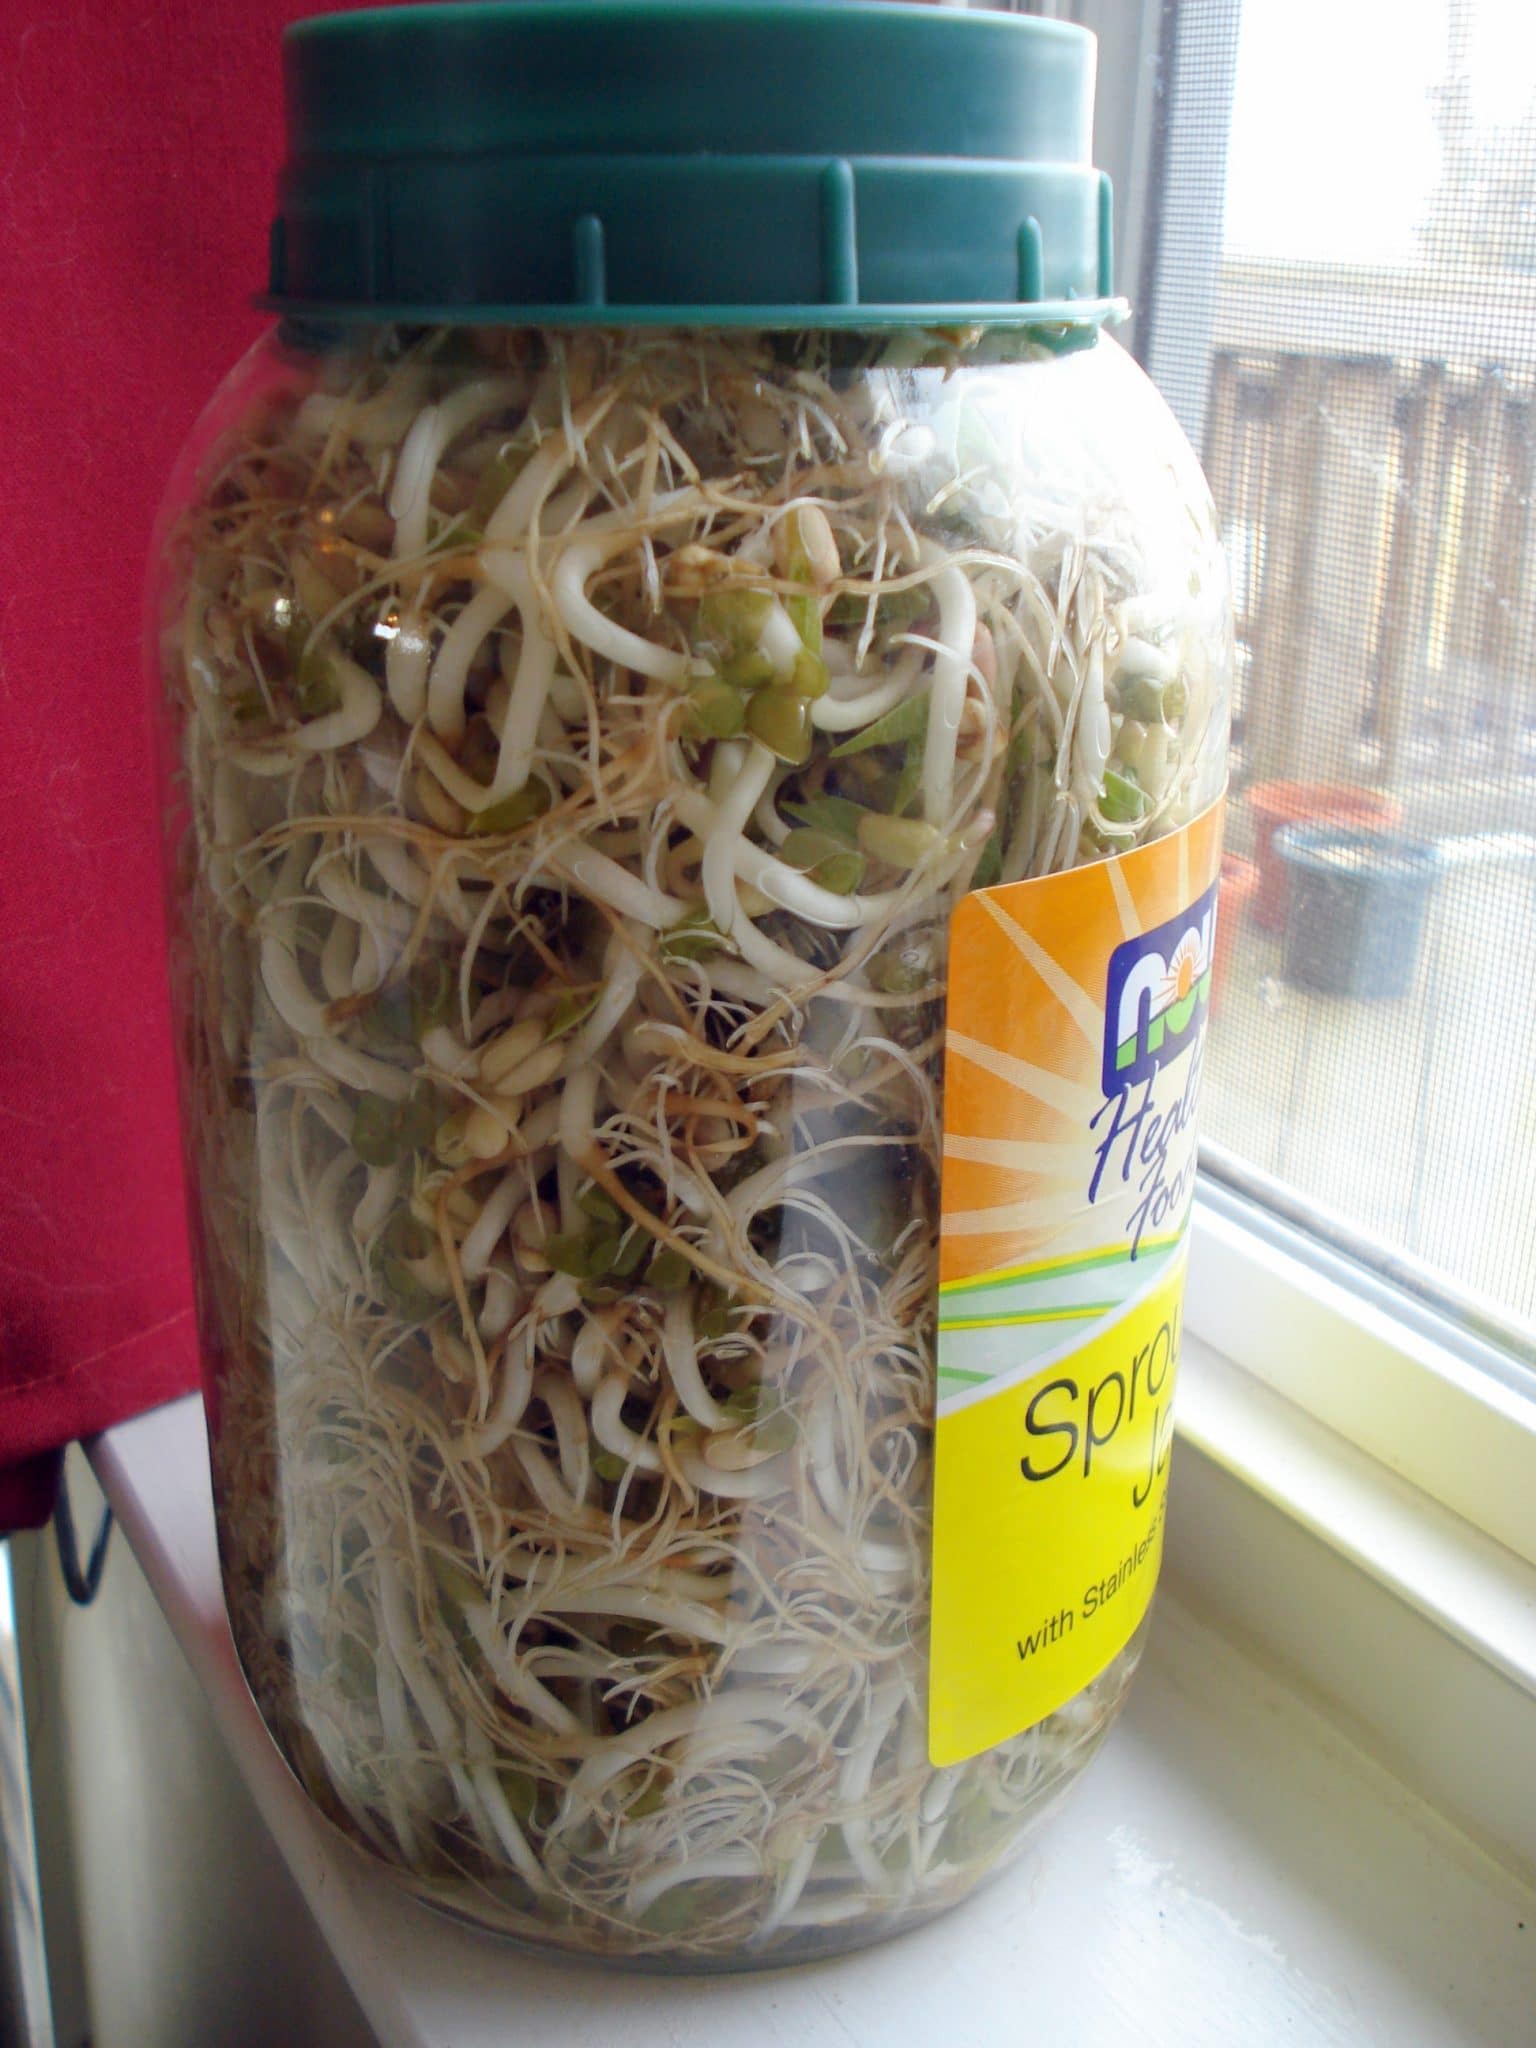 Sprouted Mung Beans continue to grow and sprout